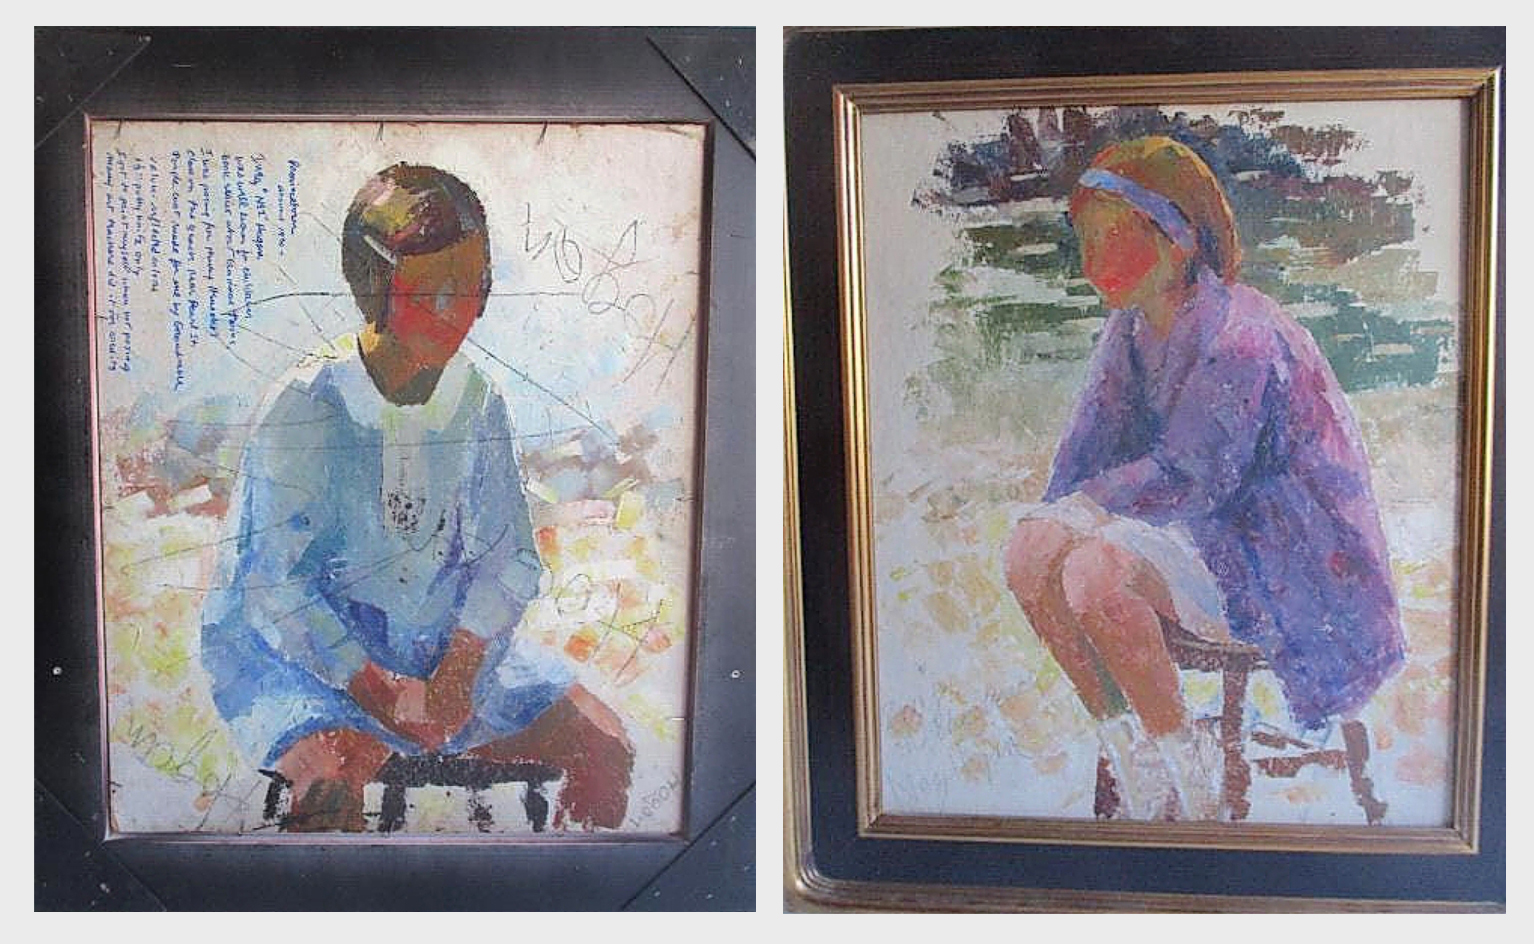 A double-sided, oil on board pair of portraits of Ines “Noz” Hogan (1895-1973), a Provincetown children’s author, on one side and the other side a self-portrait of Moore herself, 20 by 24 inches, sold for $2,950. Central Mass Auctions’ auctioneer and appraiser Wayne Tuiskula said he believes that may be an auction record for a Moore painting.